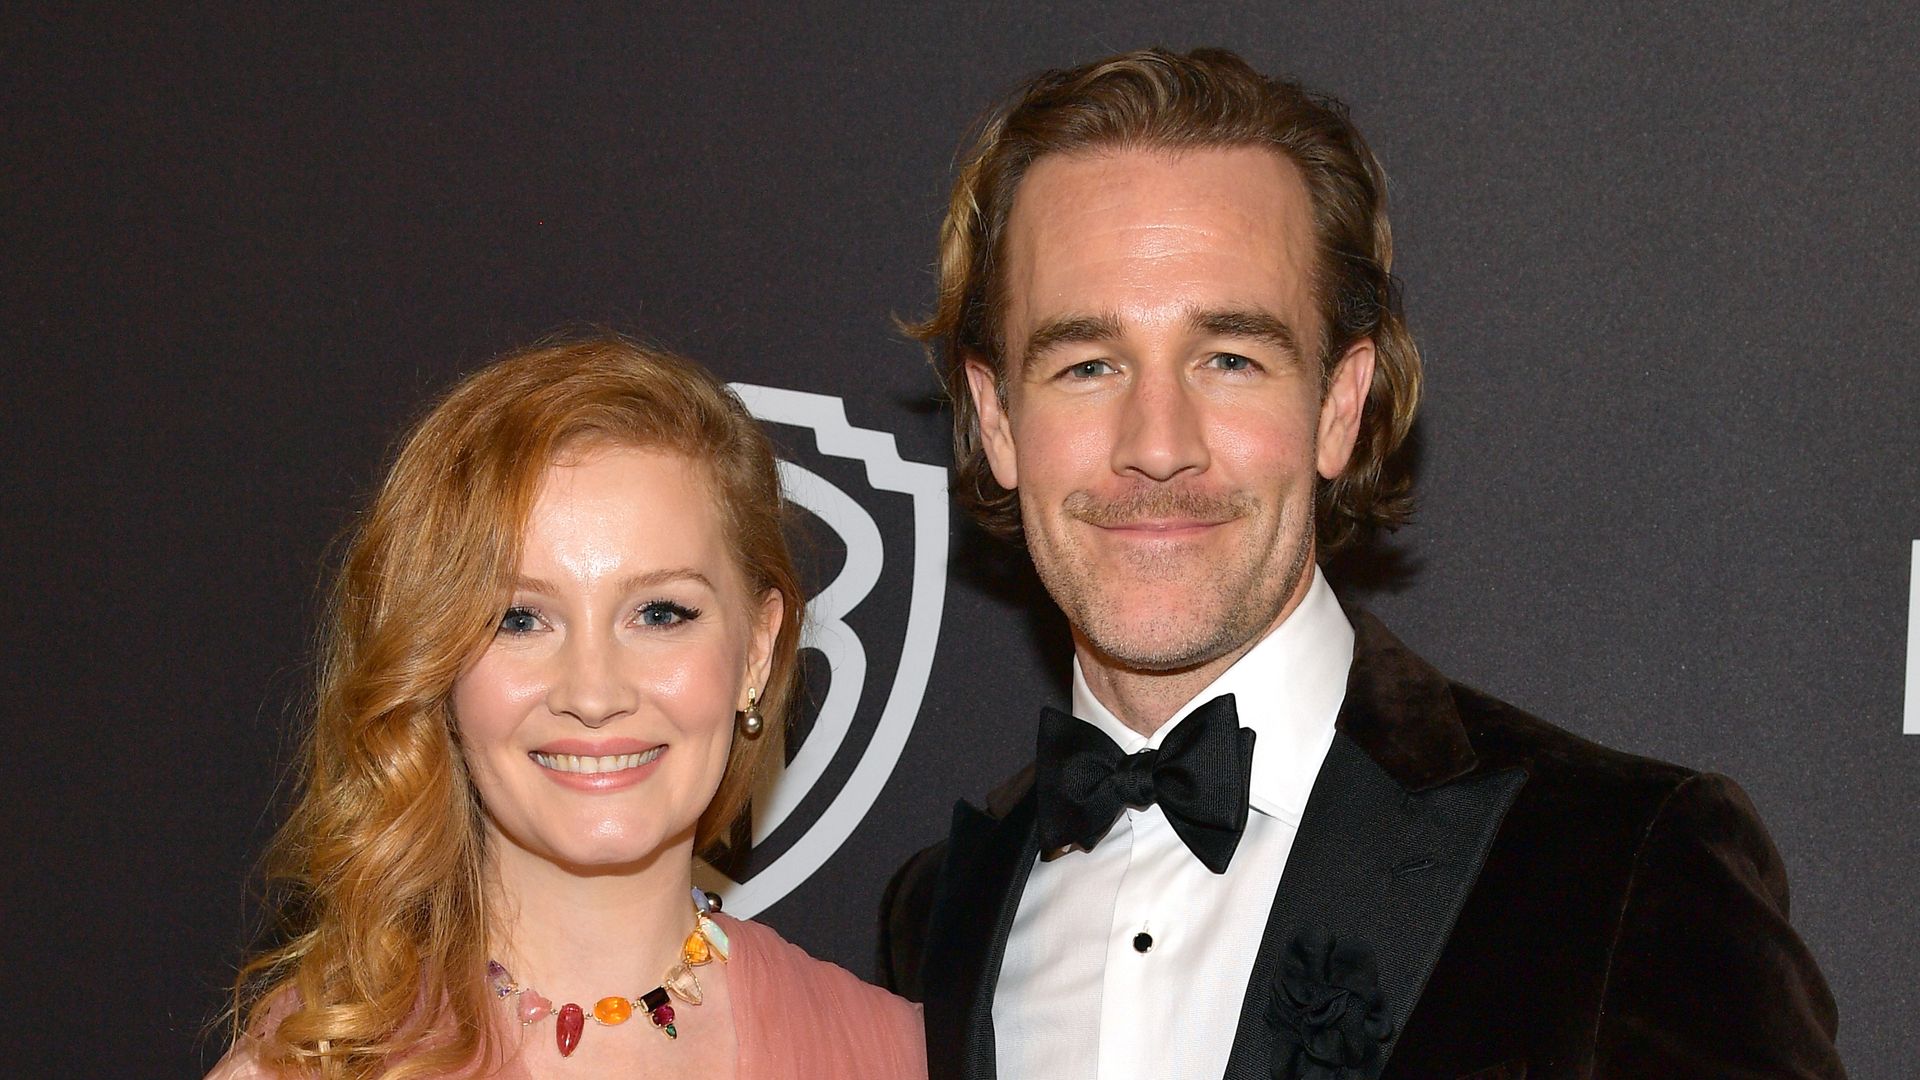 Kimberly Brook and James Van Der Beek attends the 2019 InStyle and Warner Bros. 76th Annual Golden Globe Awards Post-Party at The Beverly Hilton Hotel on January 6, 2019 in Beverly Hills, California